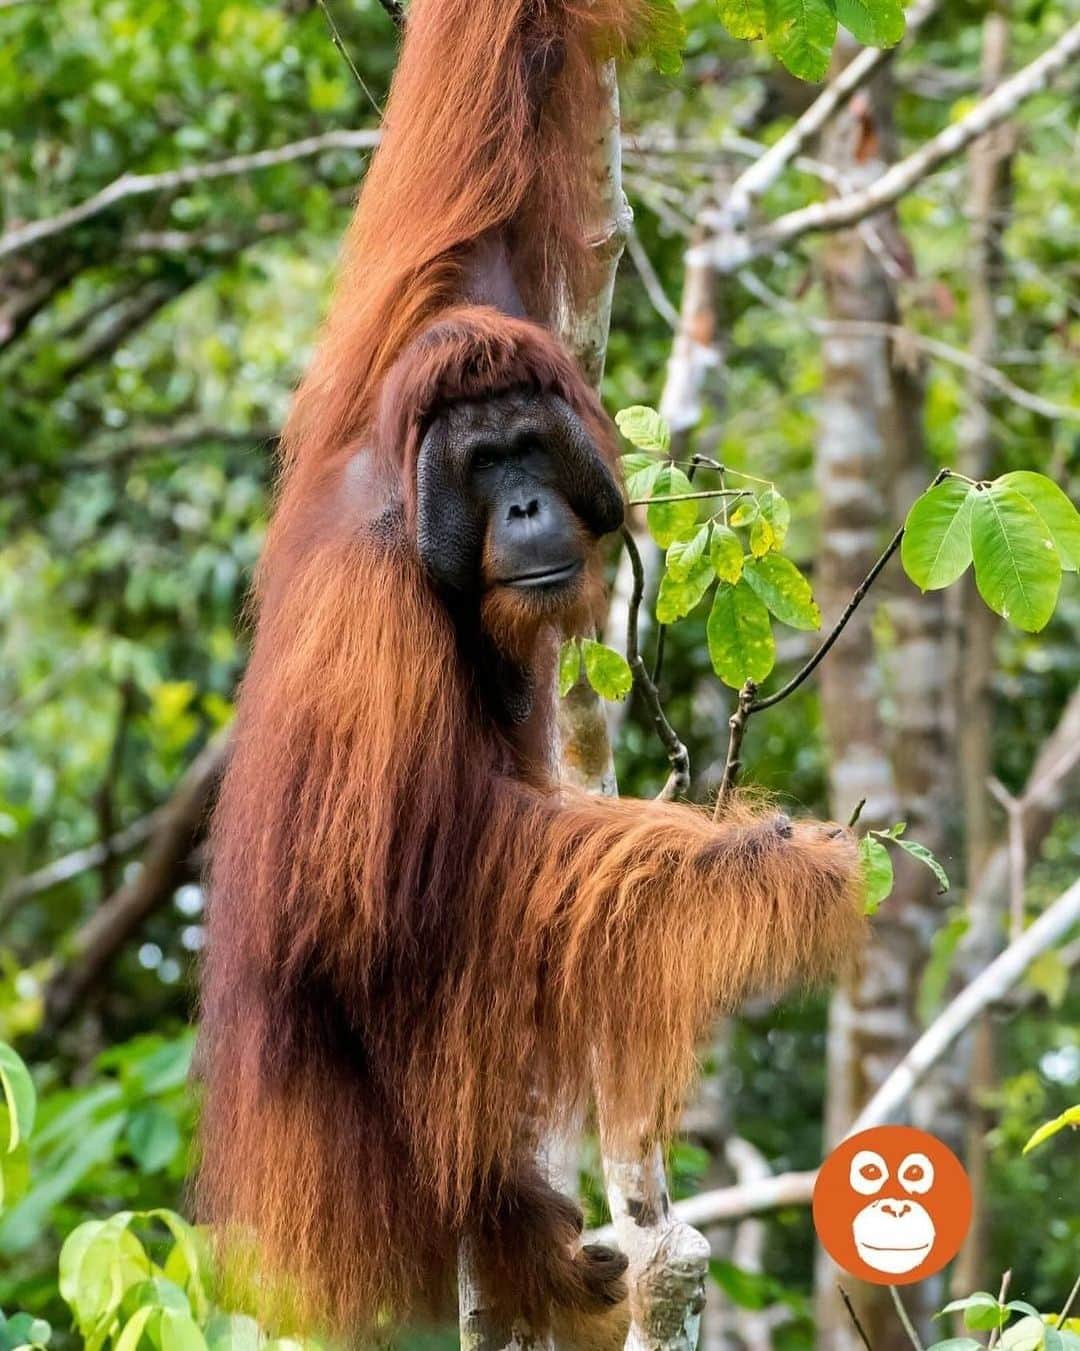 OFI Australiaのインスタグラム：「Did you know ... Orangutans have tremendous strength. Like humans, orangutans have opposable thumbs. Their big toes are also opposable which helps them to hold onto trees and hang upside-down from branches for long periods of time to retrieve fruit and eat young leaves. Fully developed adult males can weigh up to 135 kg, while adult females weigh less than half that weight. Adult male orangutans can reach a height of 1.5 metres and can have 2.4 metre arm spans.  #OrangutanAwarenessWeek #oaw2023 #OAW #saveorangutans #saynotopalmoil #orangutanstrength #orangutanfacts #orangutansize」